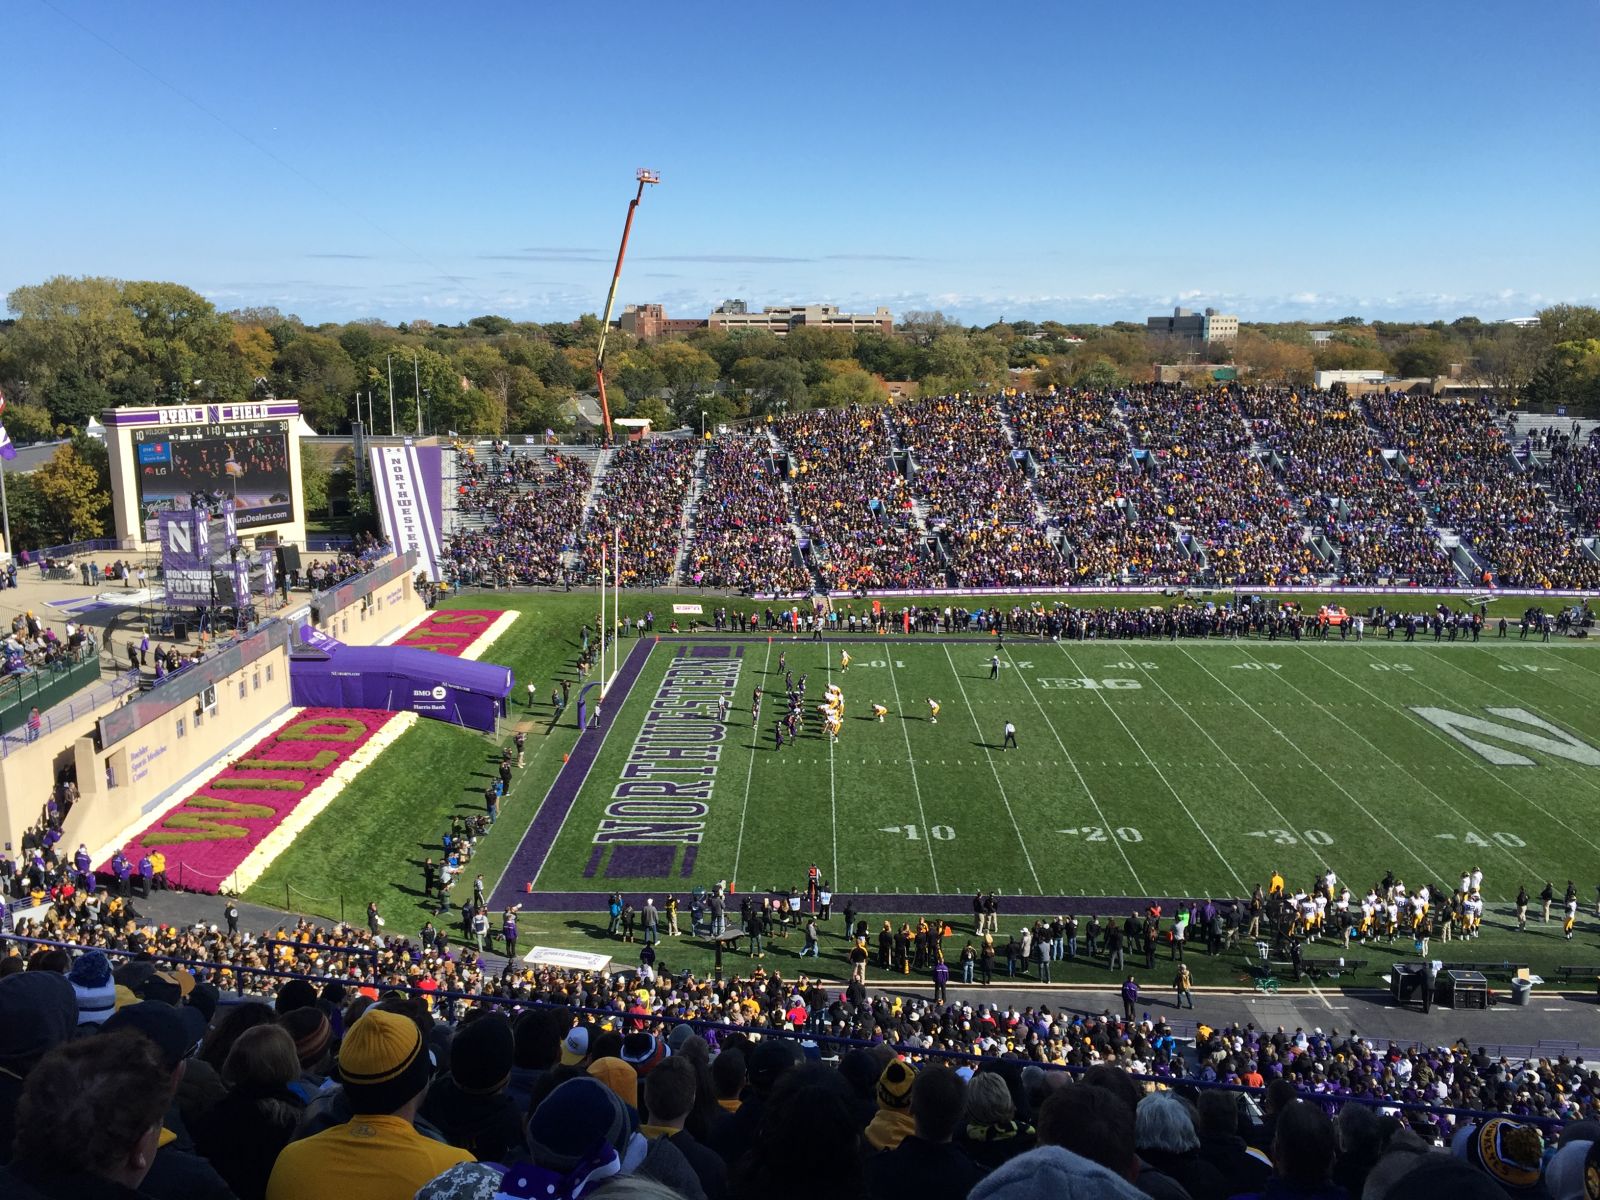 section 232, row 35 seat view  - ryan field